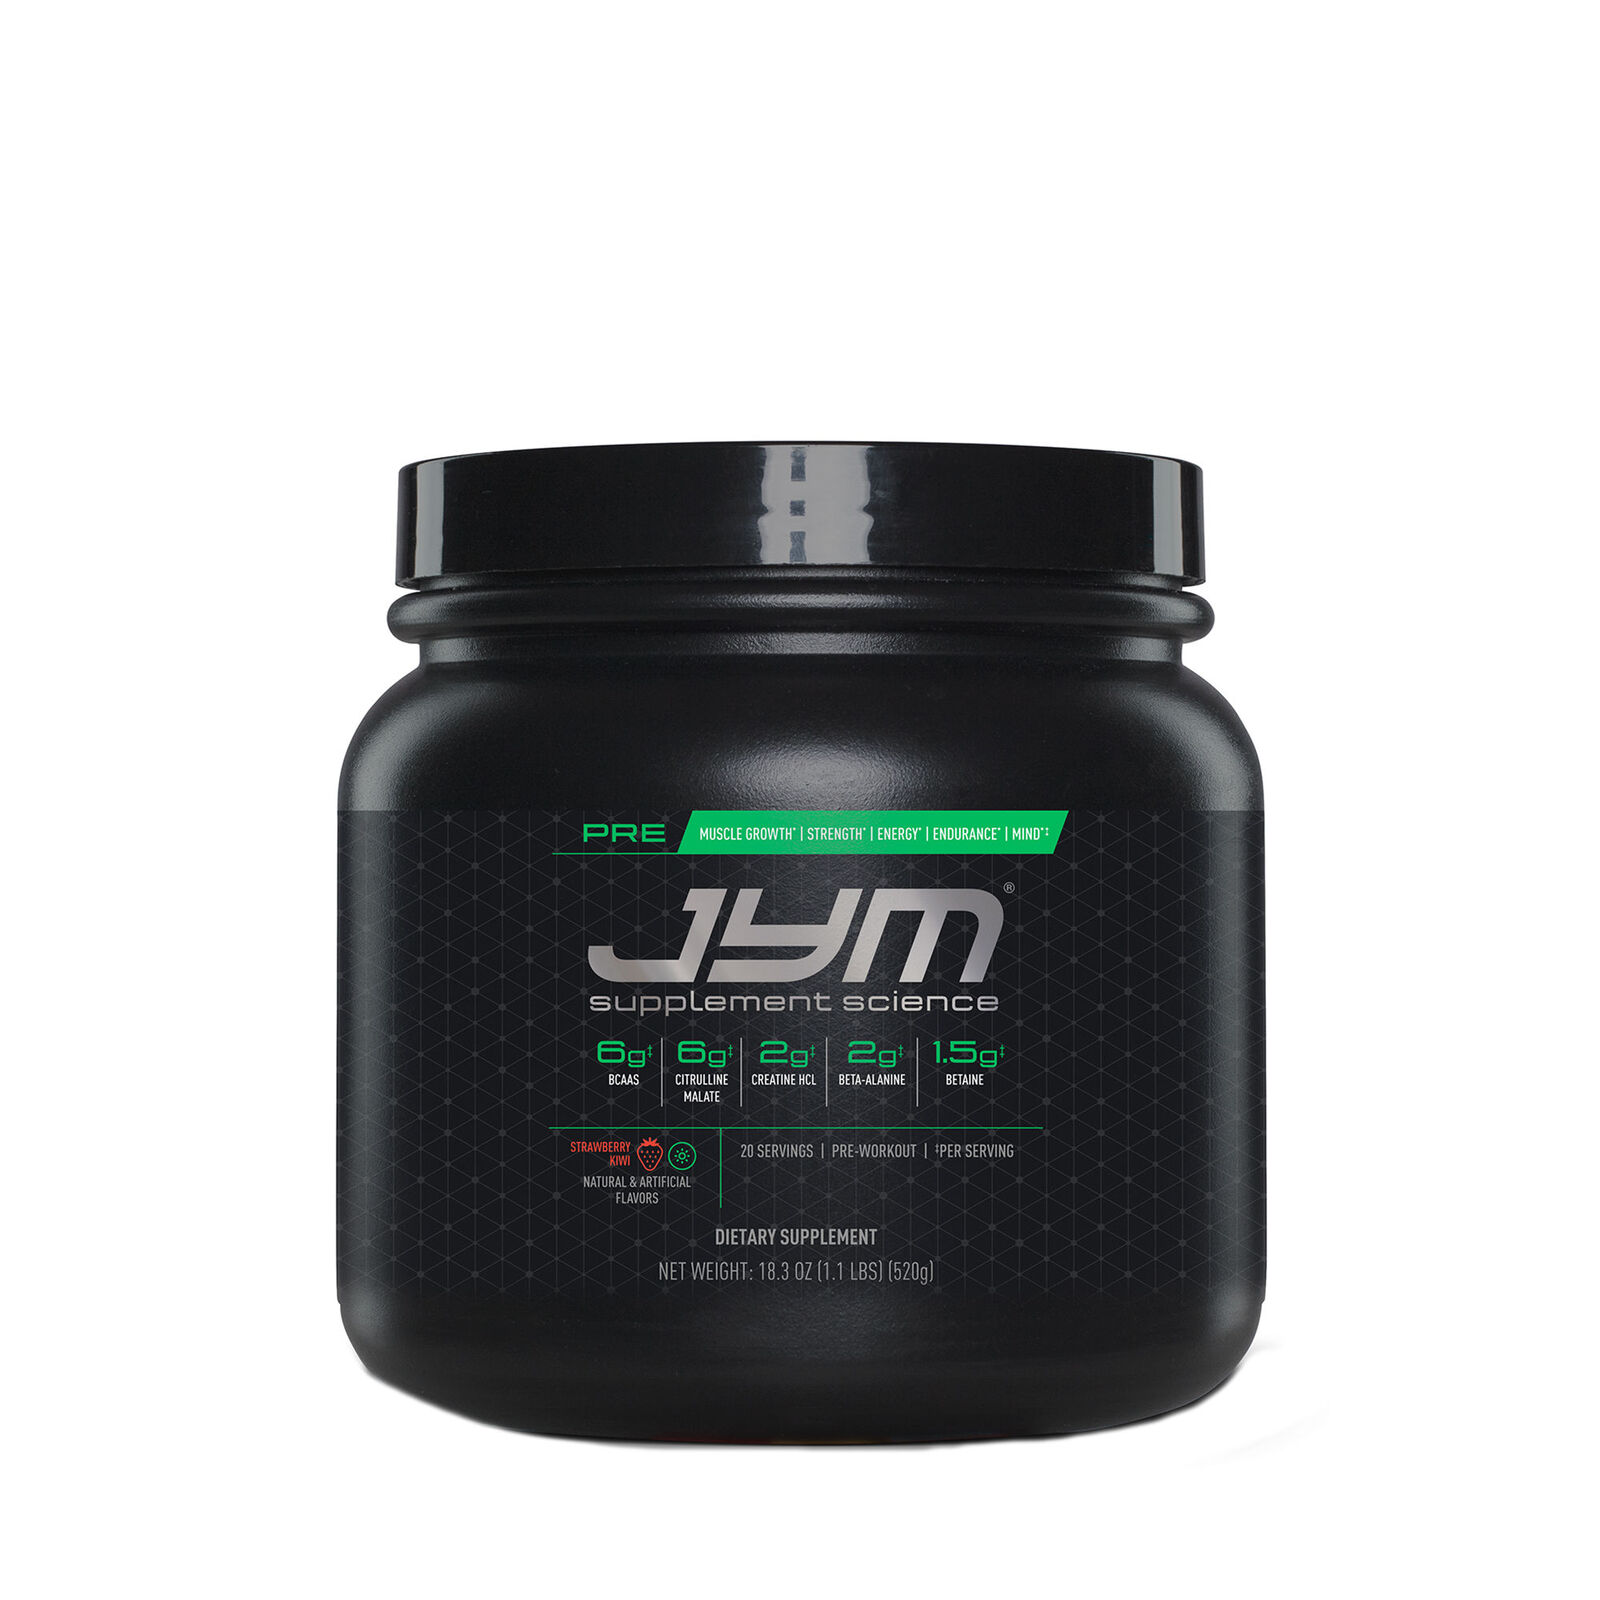 15 Minute Pro jym post workout 